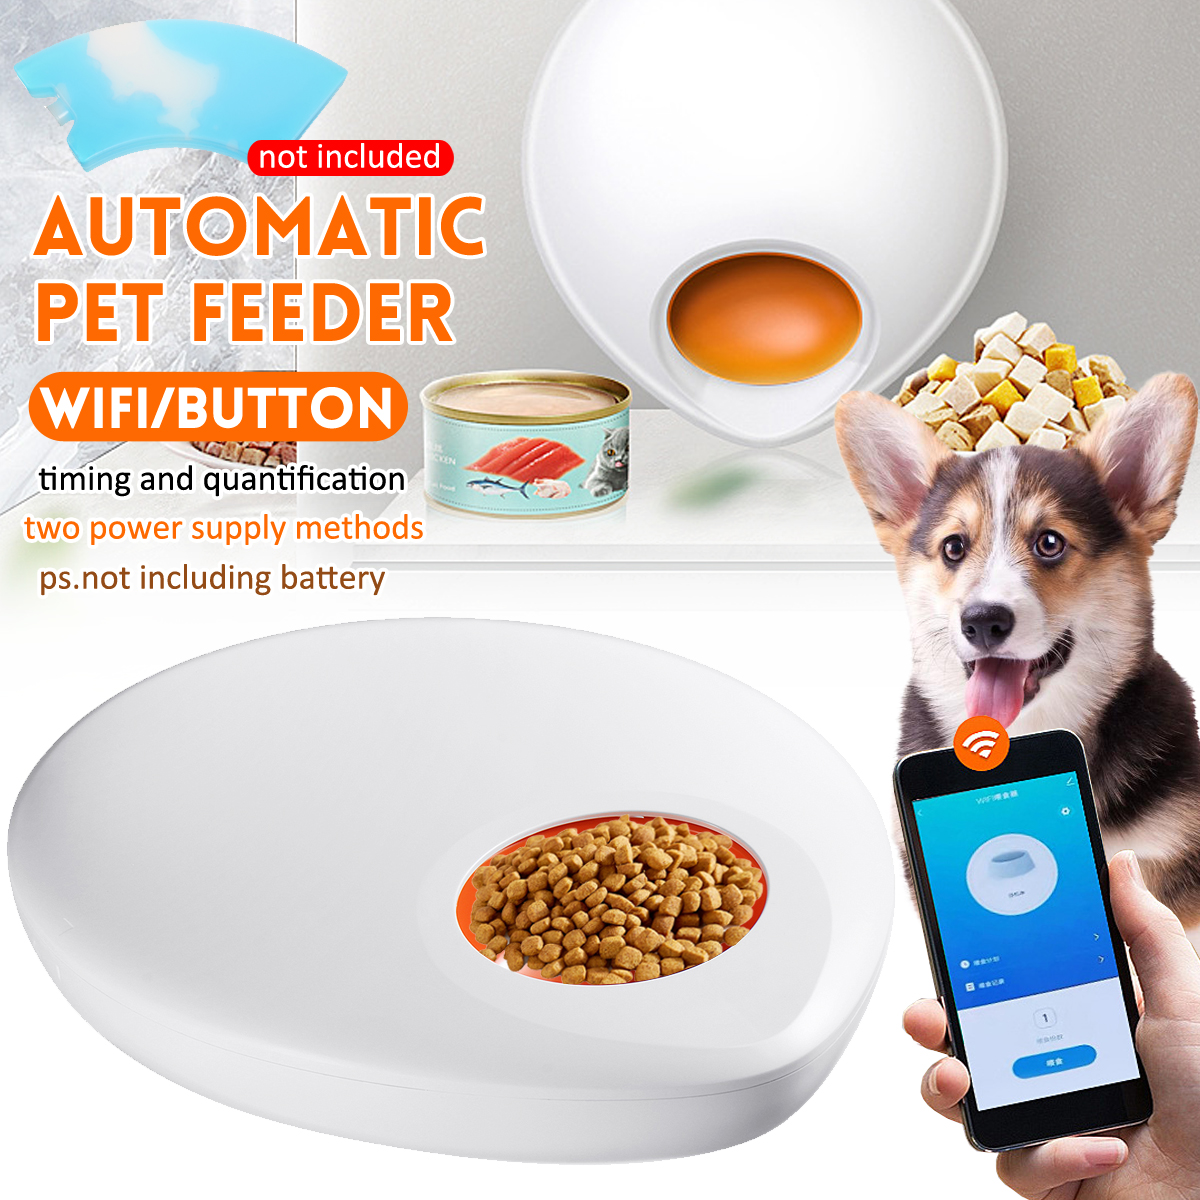 DUDUPET-Automatic-Pet-Feeder-For-CatDog-WiFi-Smart-Rotatable-Dogs-Food-Dispenser-Control-APP-Timed-R-1927451-2